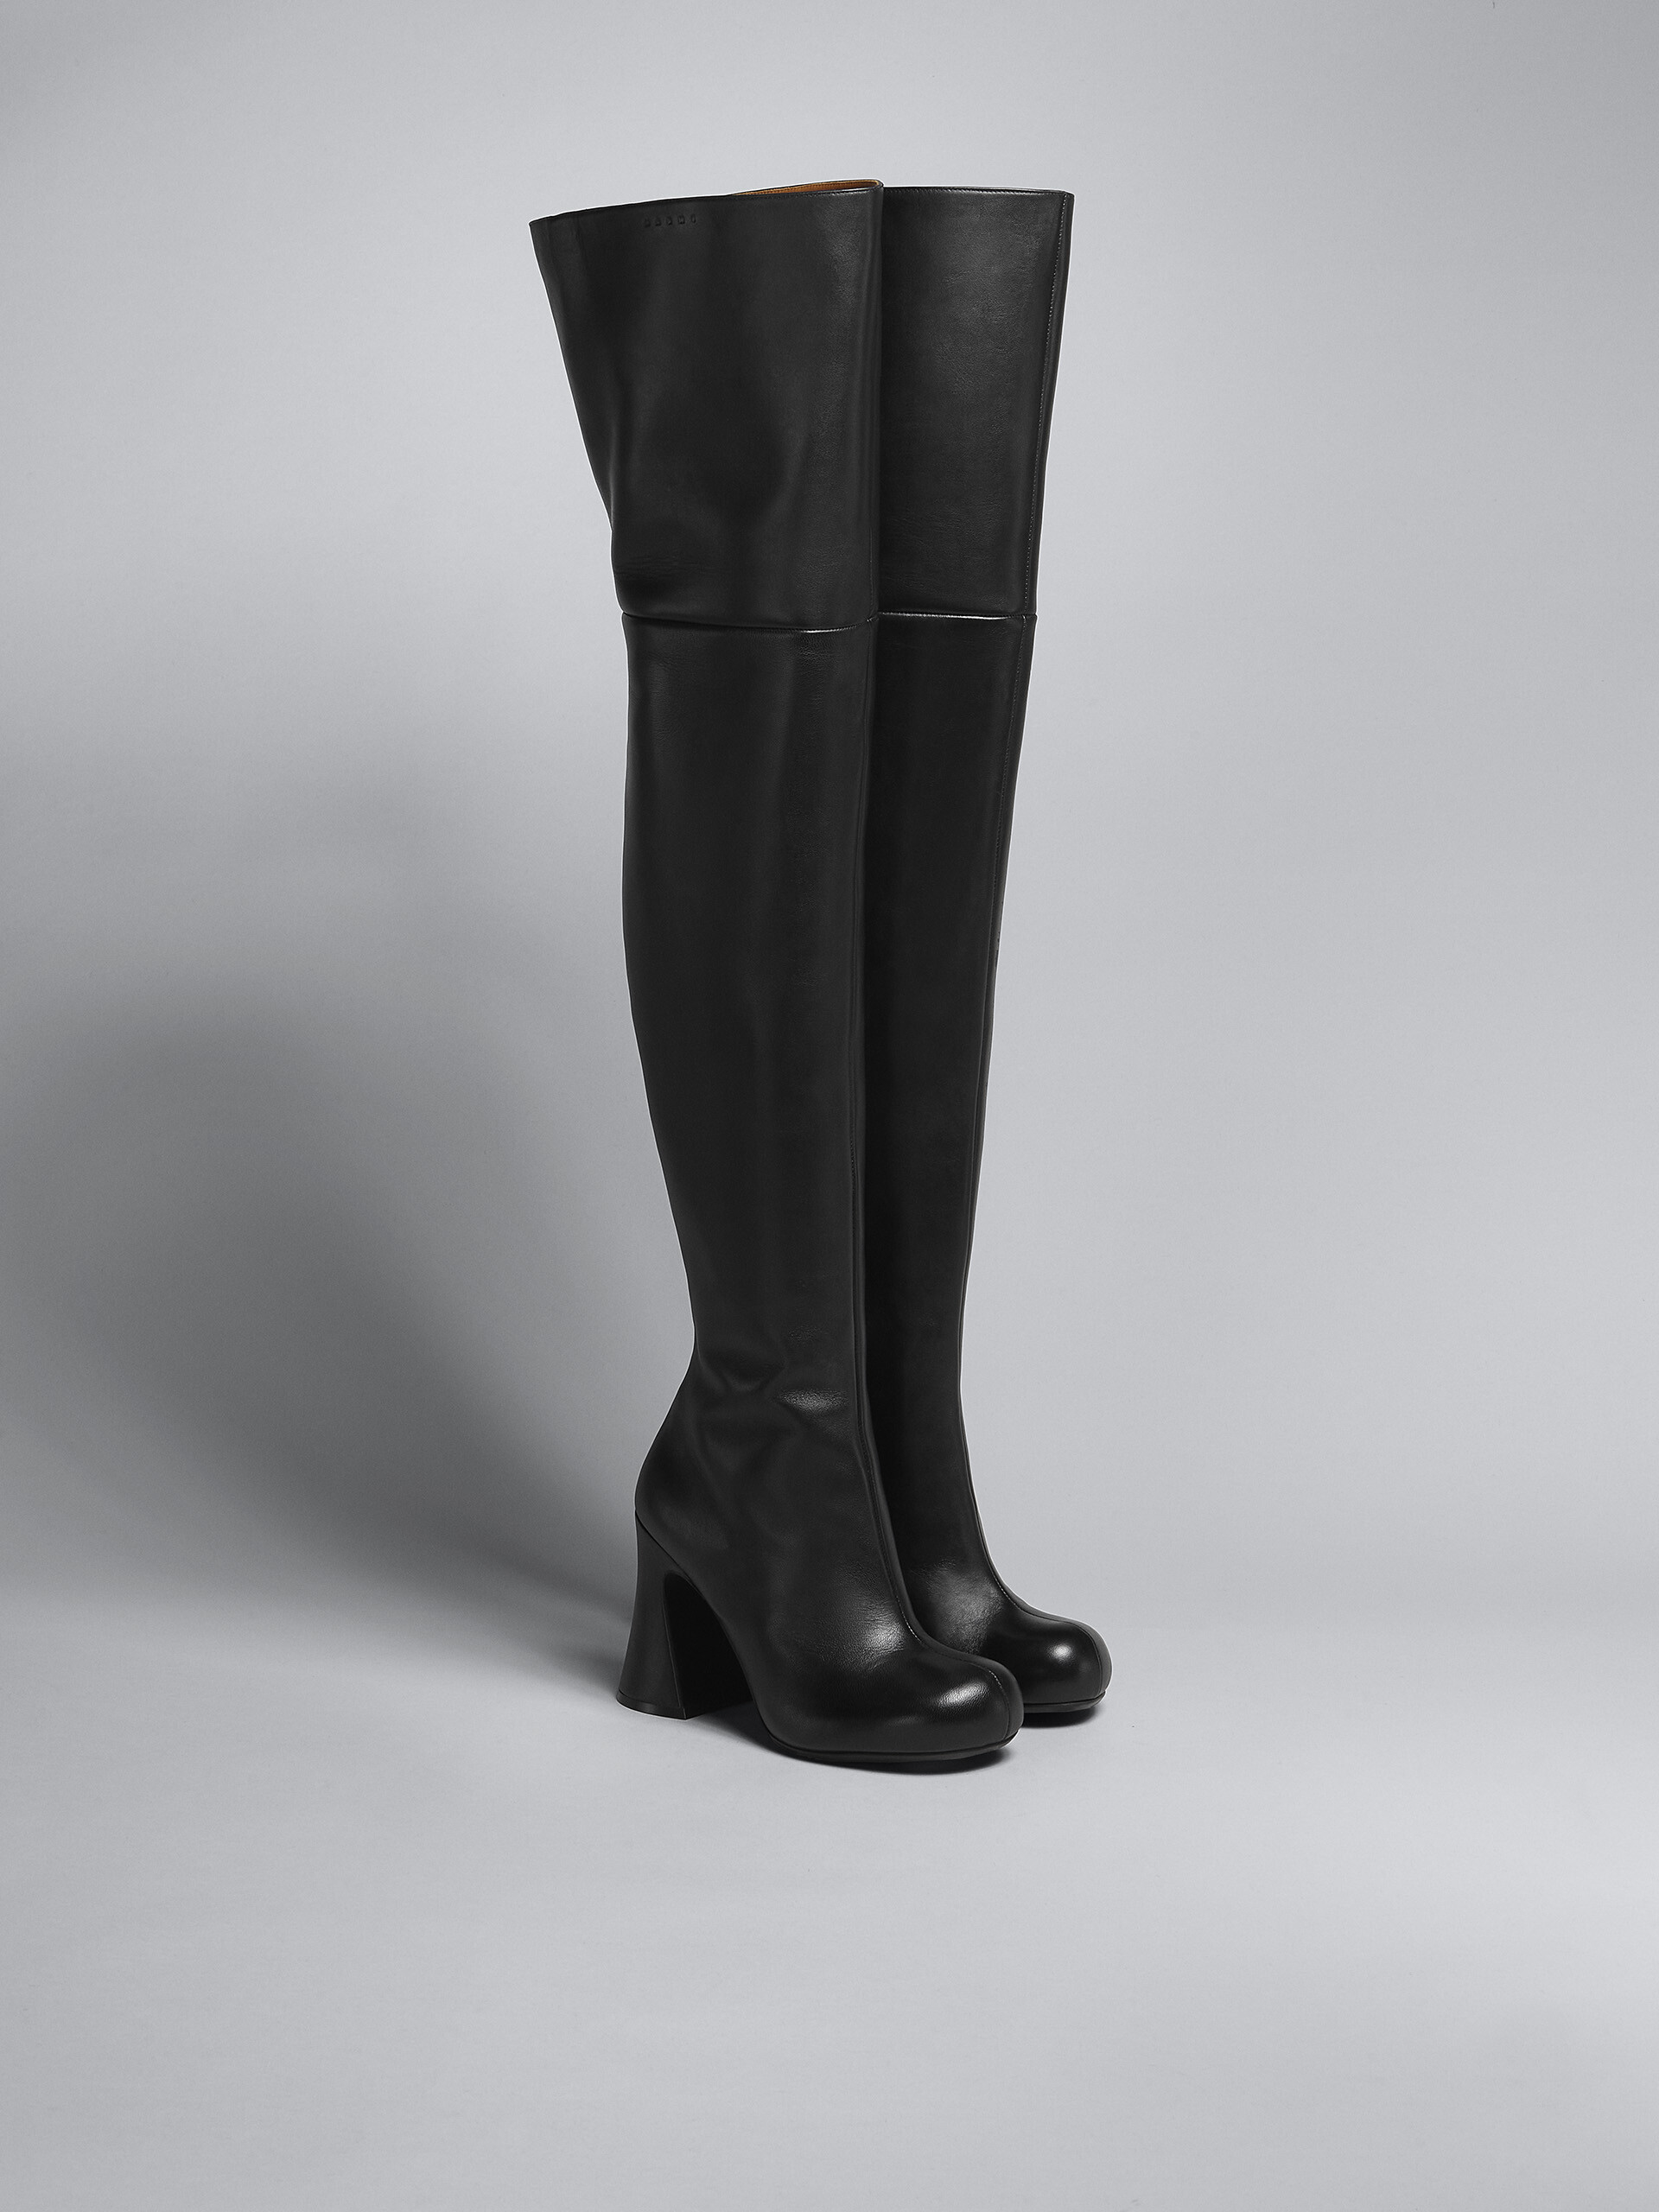 Black over-the-knee leather boot - Boots - Image 2